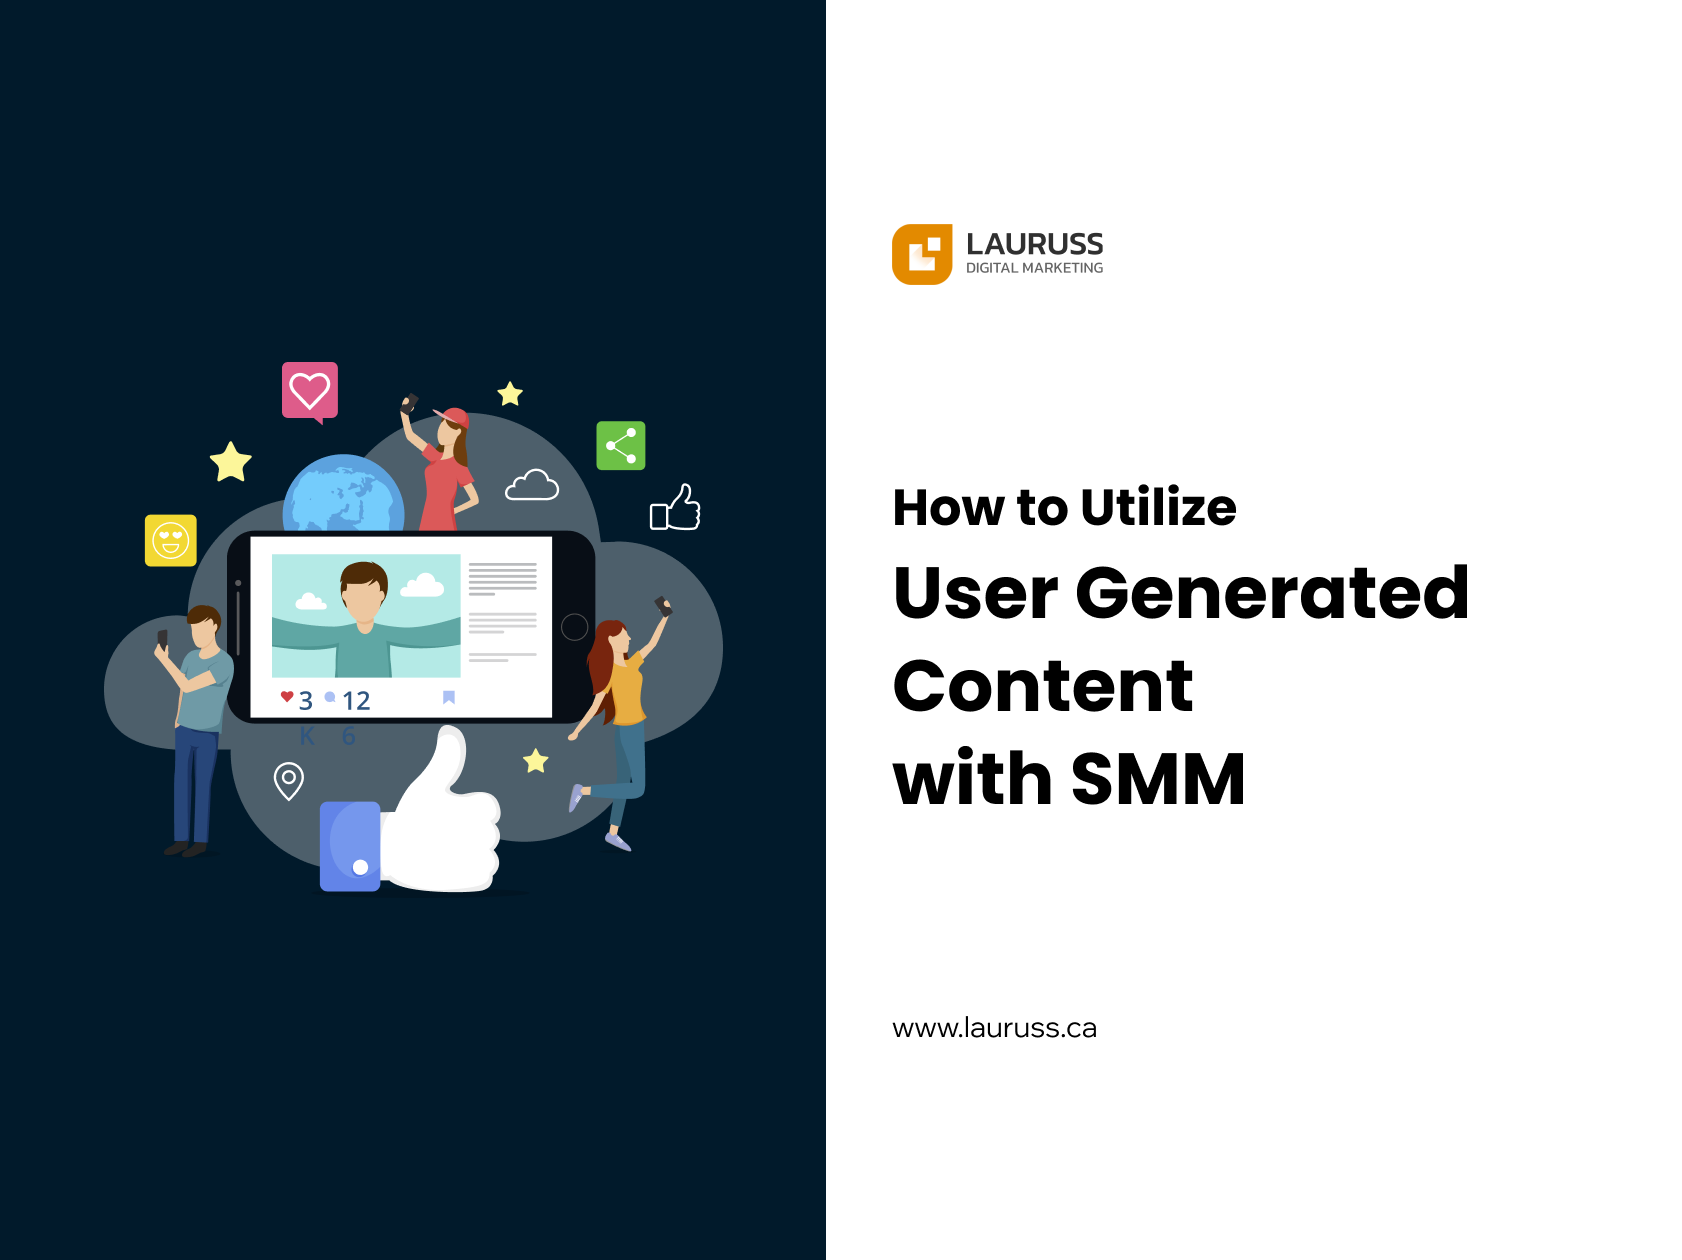 How to utilize popular user-generated content with social media marketing